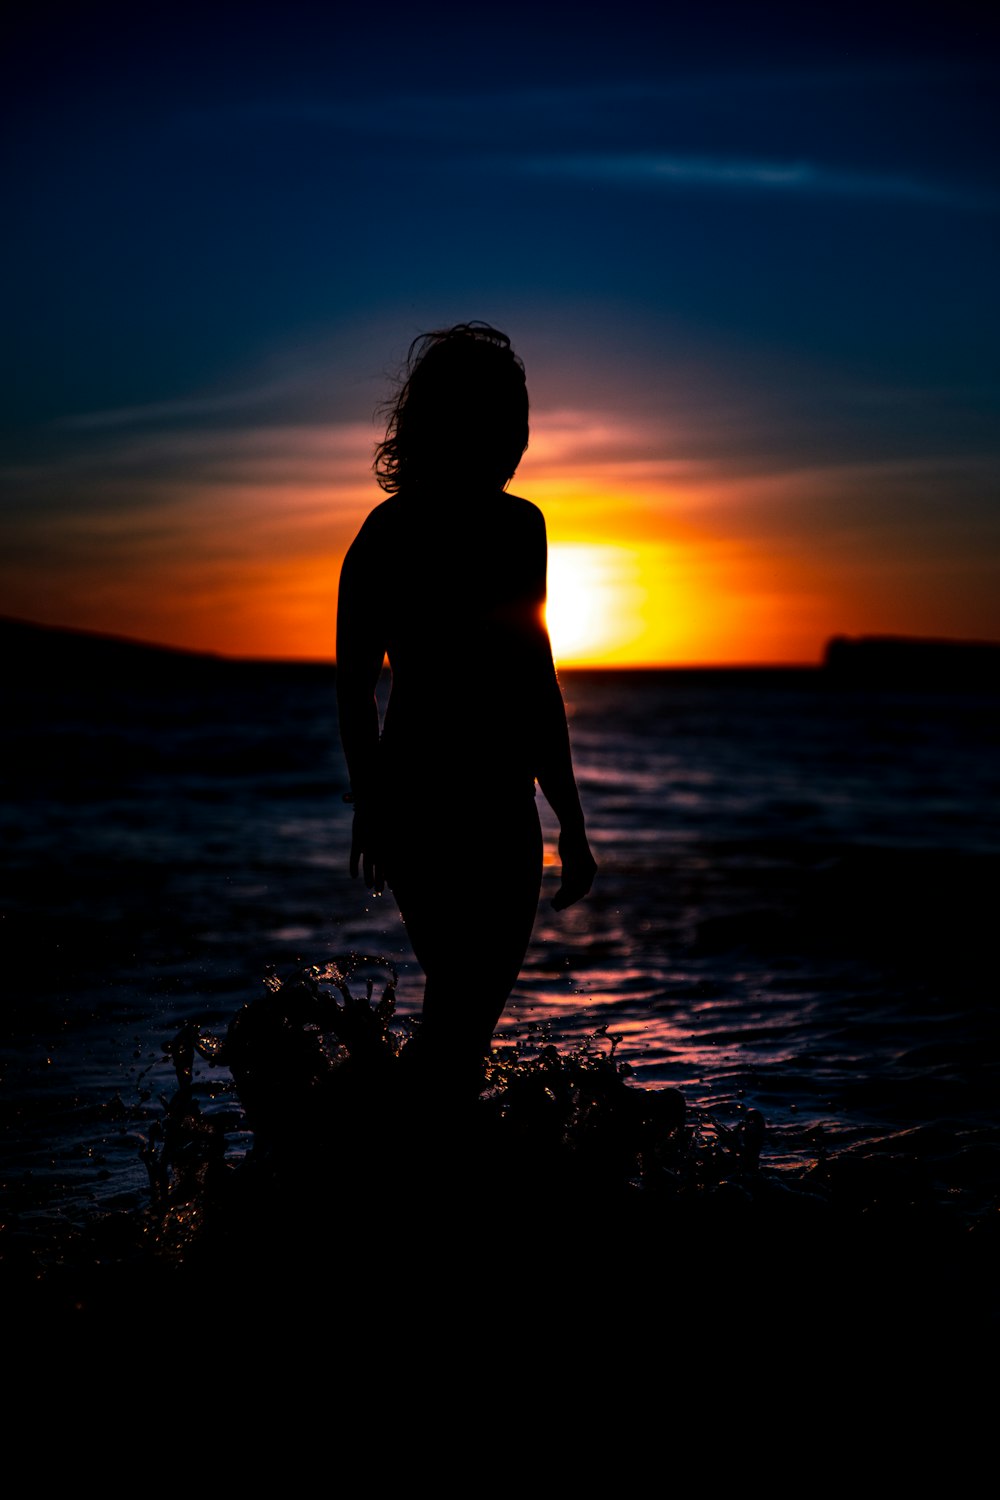 silhouette of woman during golden hour